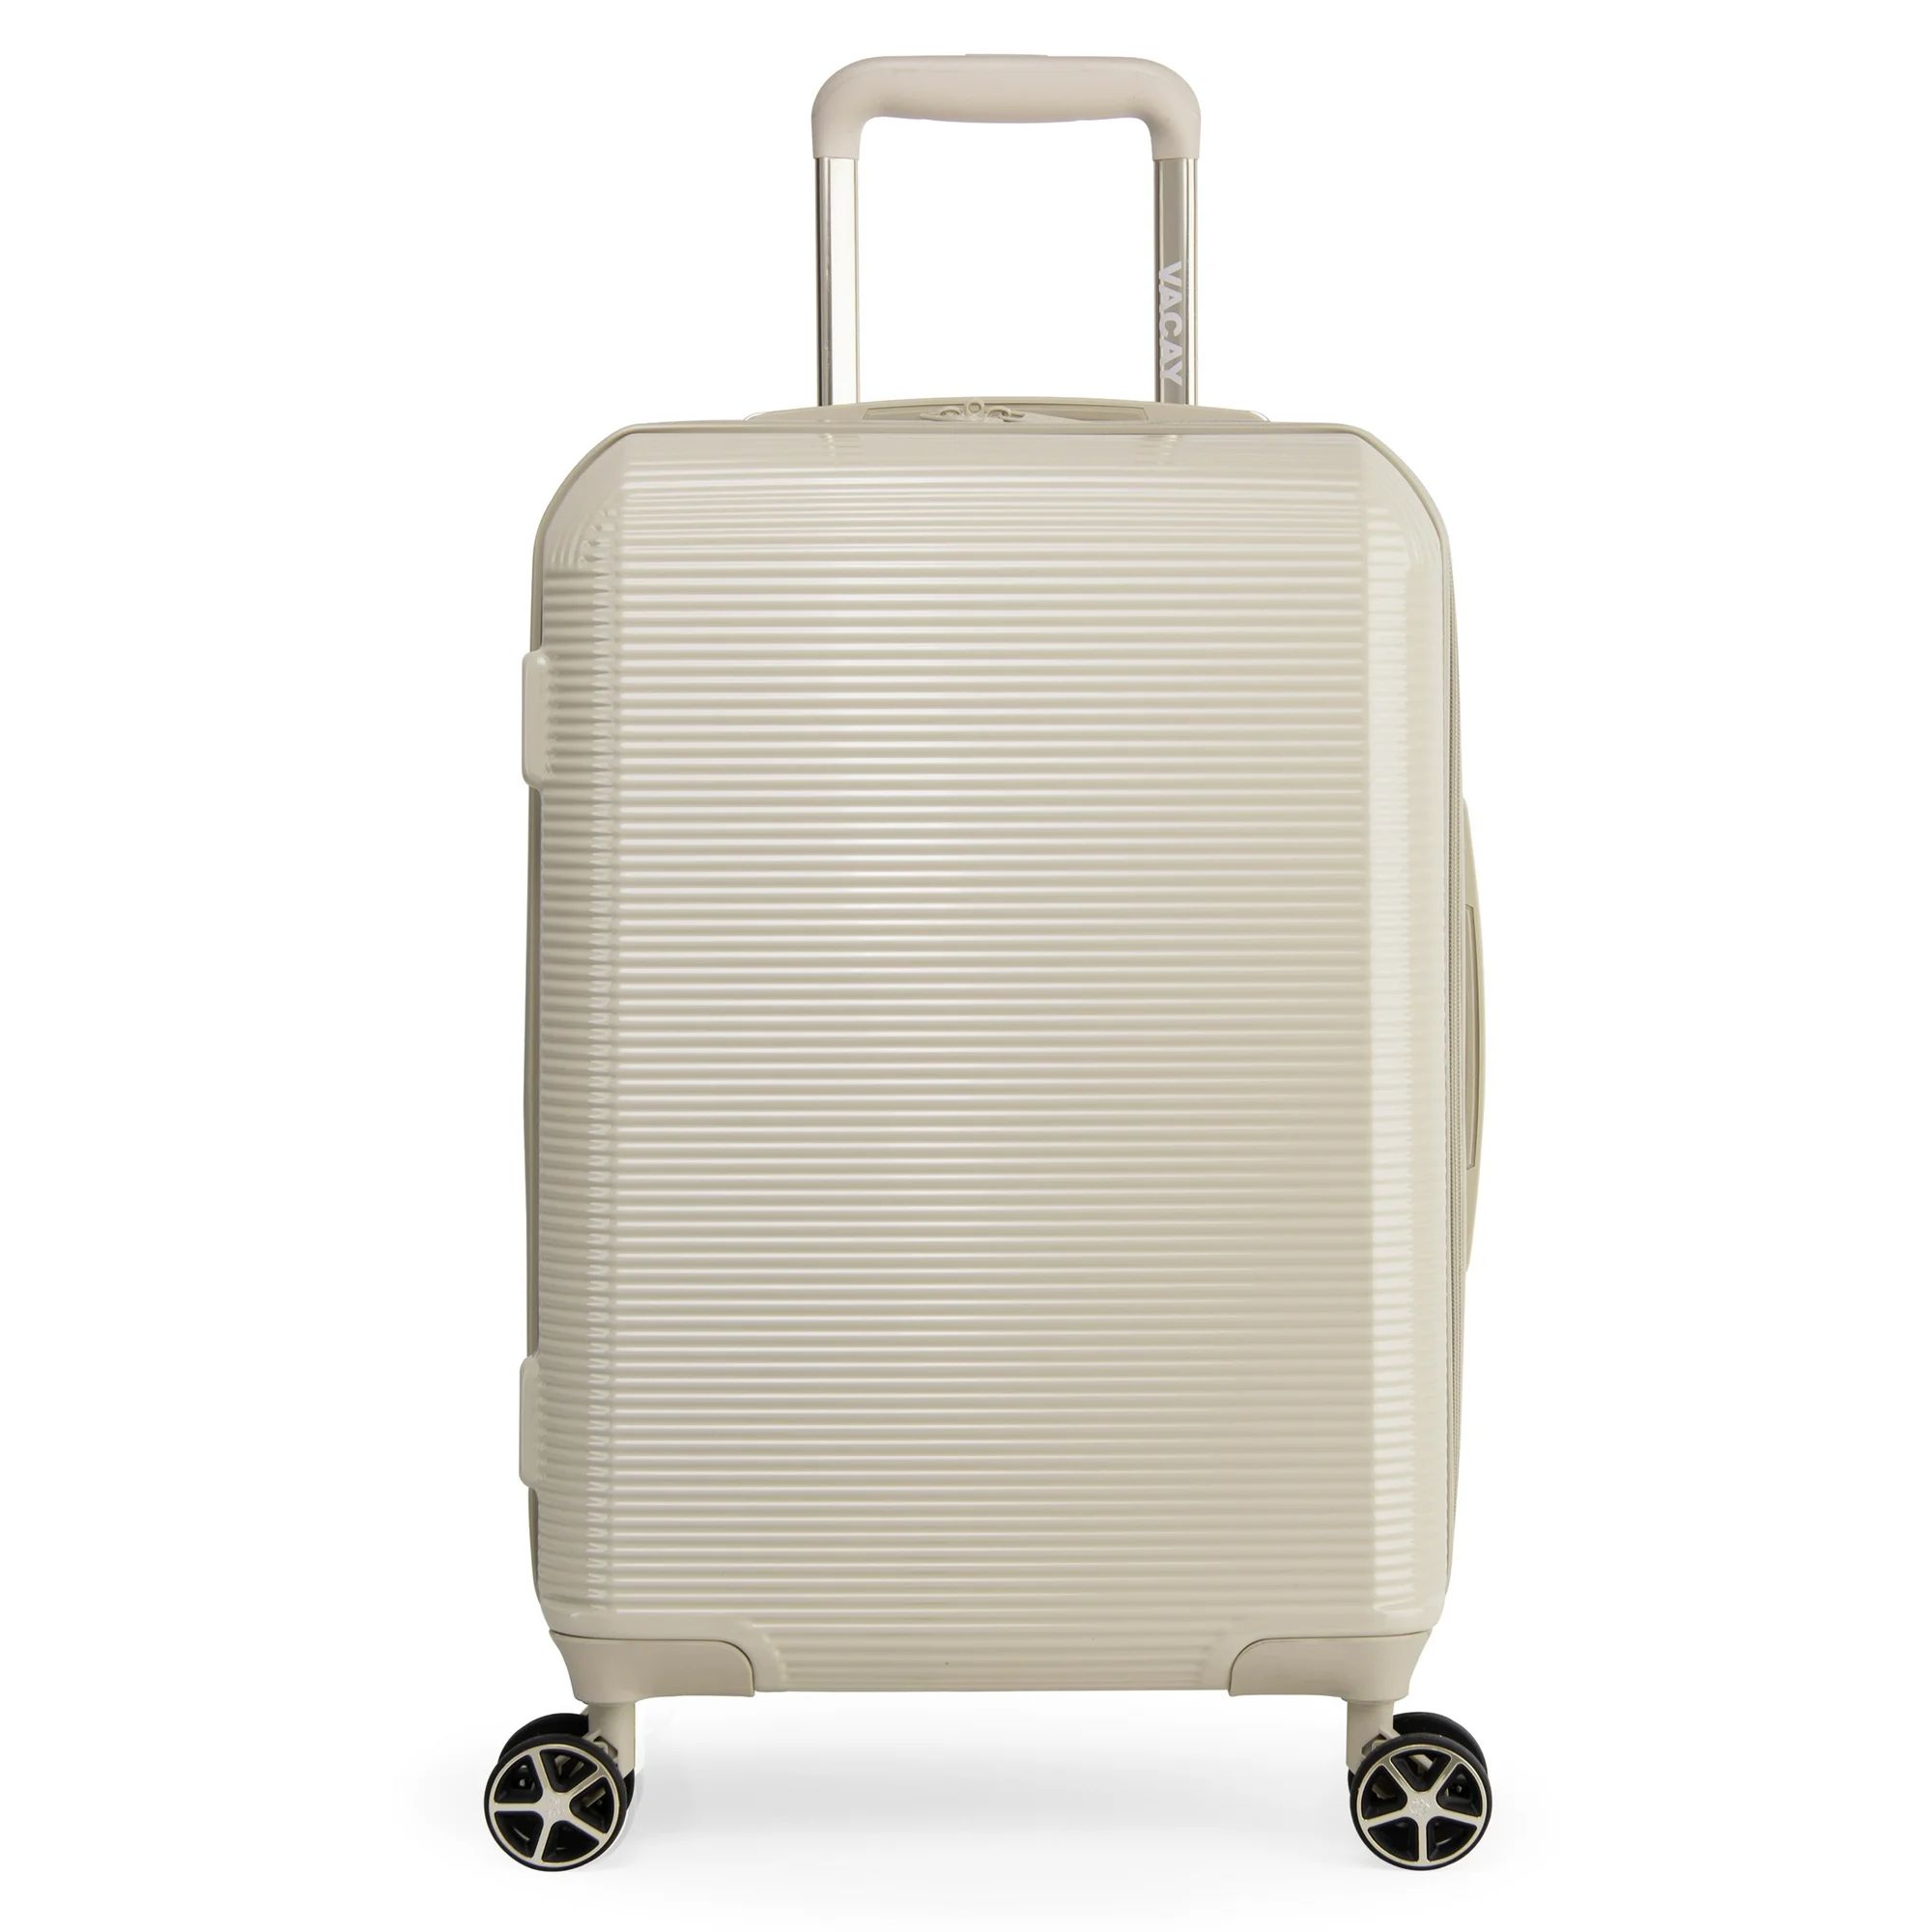 Vacay Hardside Future Collection by iFLY Luggage, 20" Carry-on Luggage, Sand | Walmart (US)